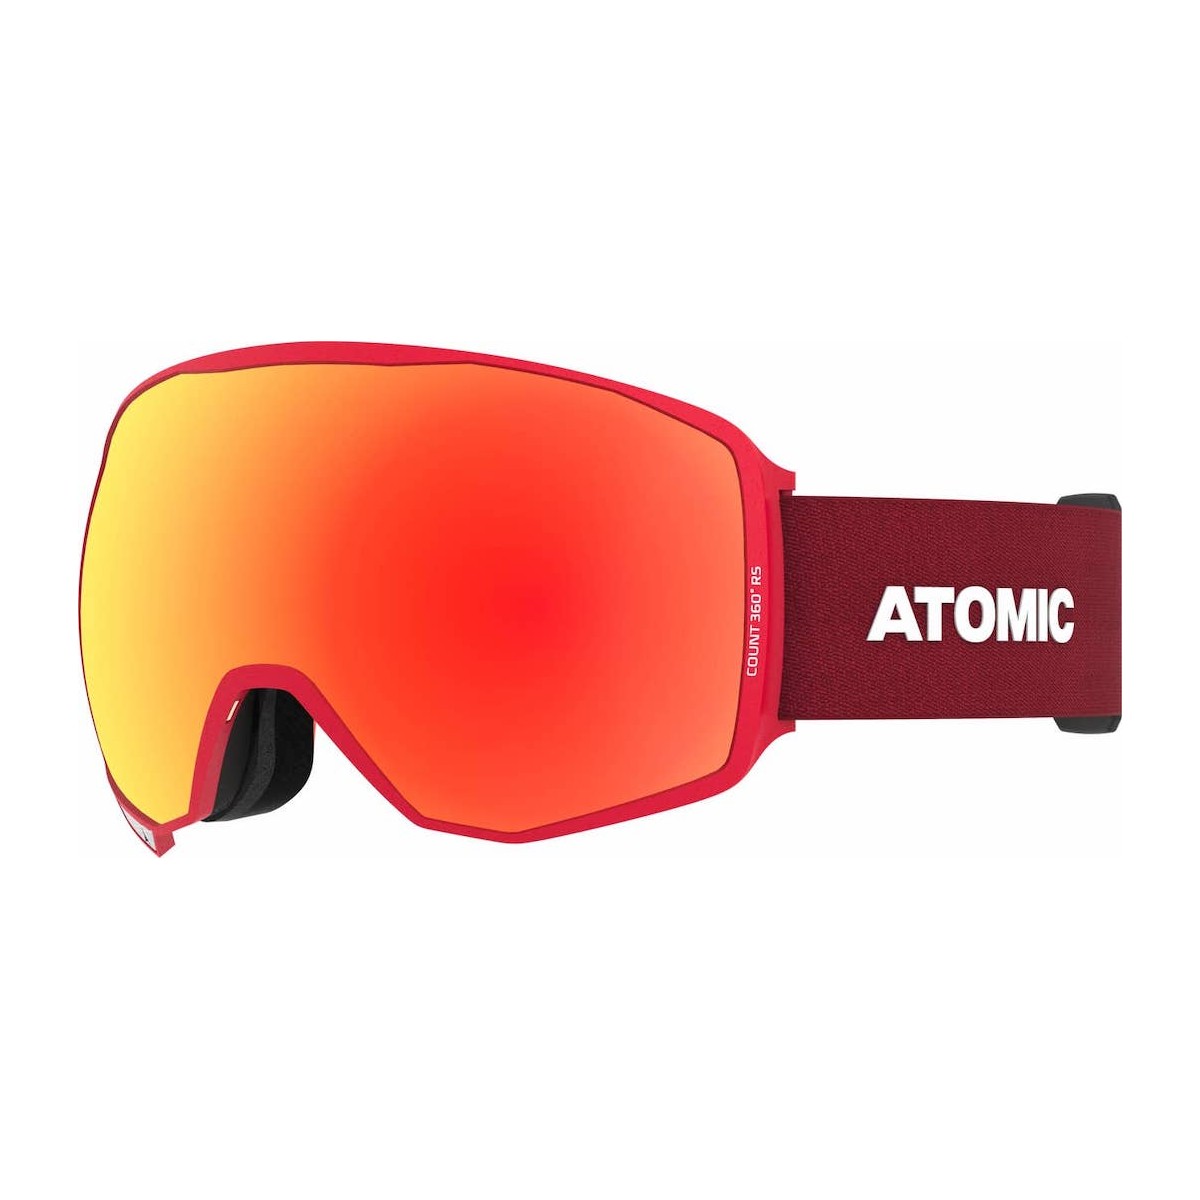 ATOMIC COUNT 360 HD RS W/RED HD C2-3 W/YELLOW BLUE HD C2-3 W/CLEAR C0 brilles - sarkana